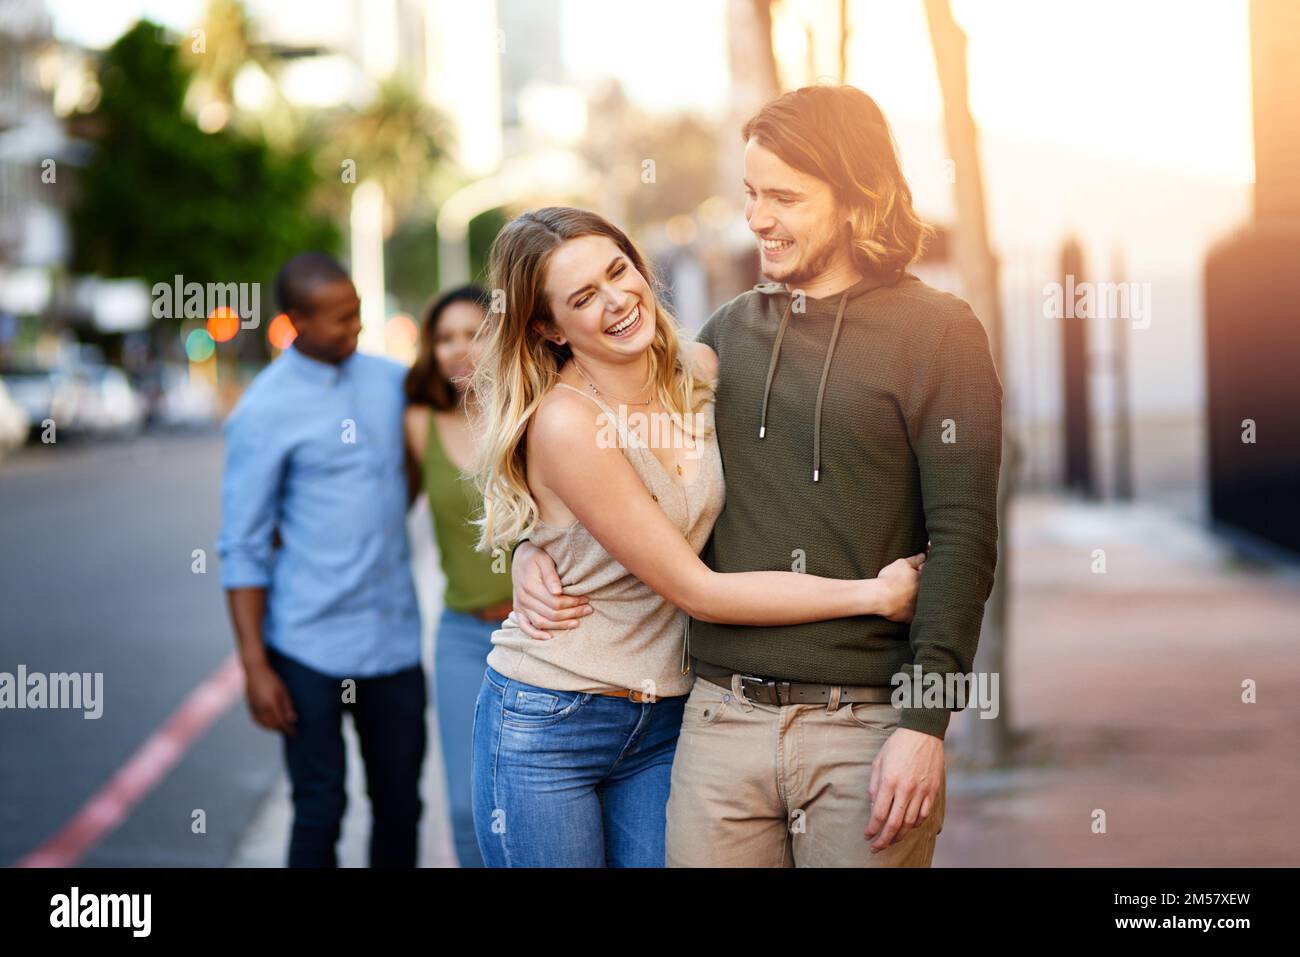 Love just got real. two happy young couples taking a walk through the city. Stock Photo